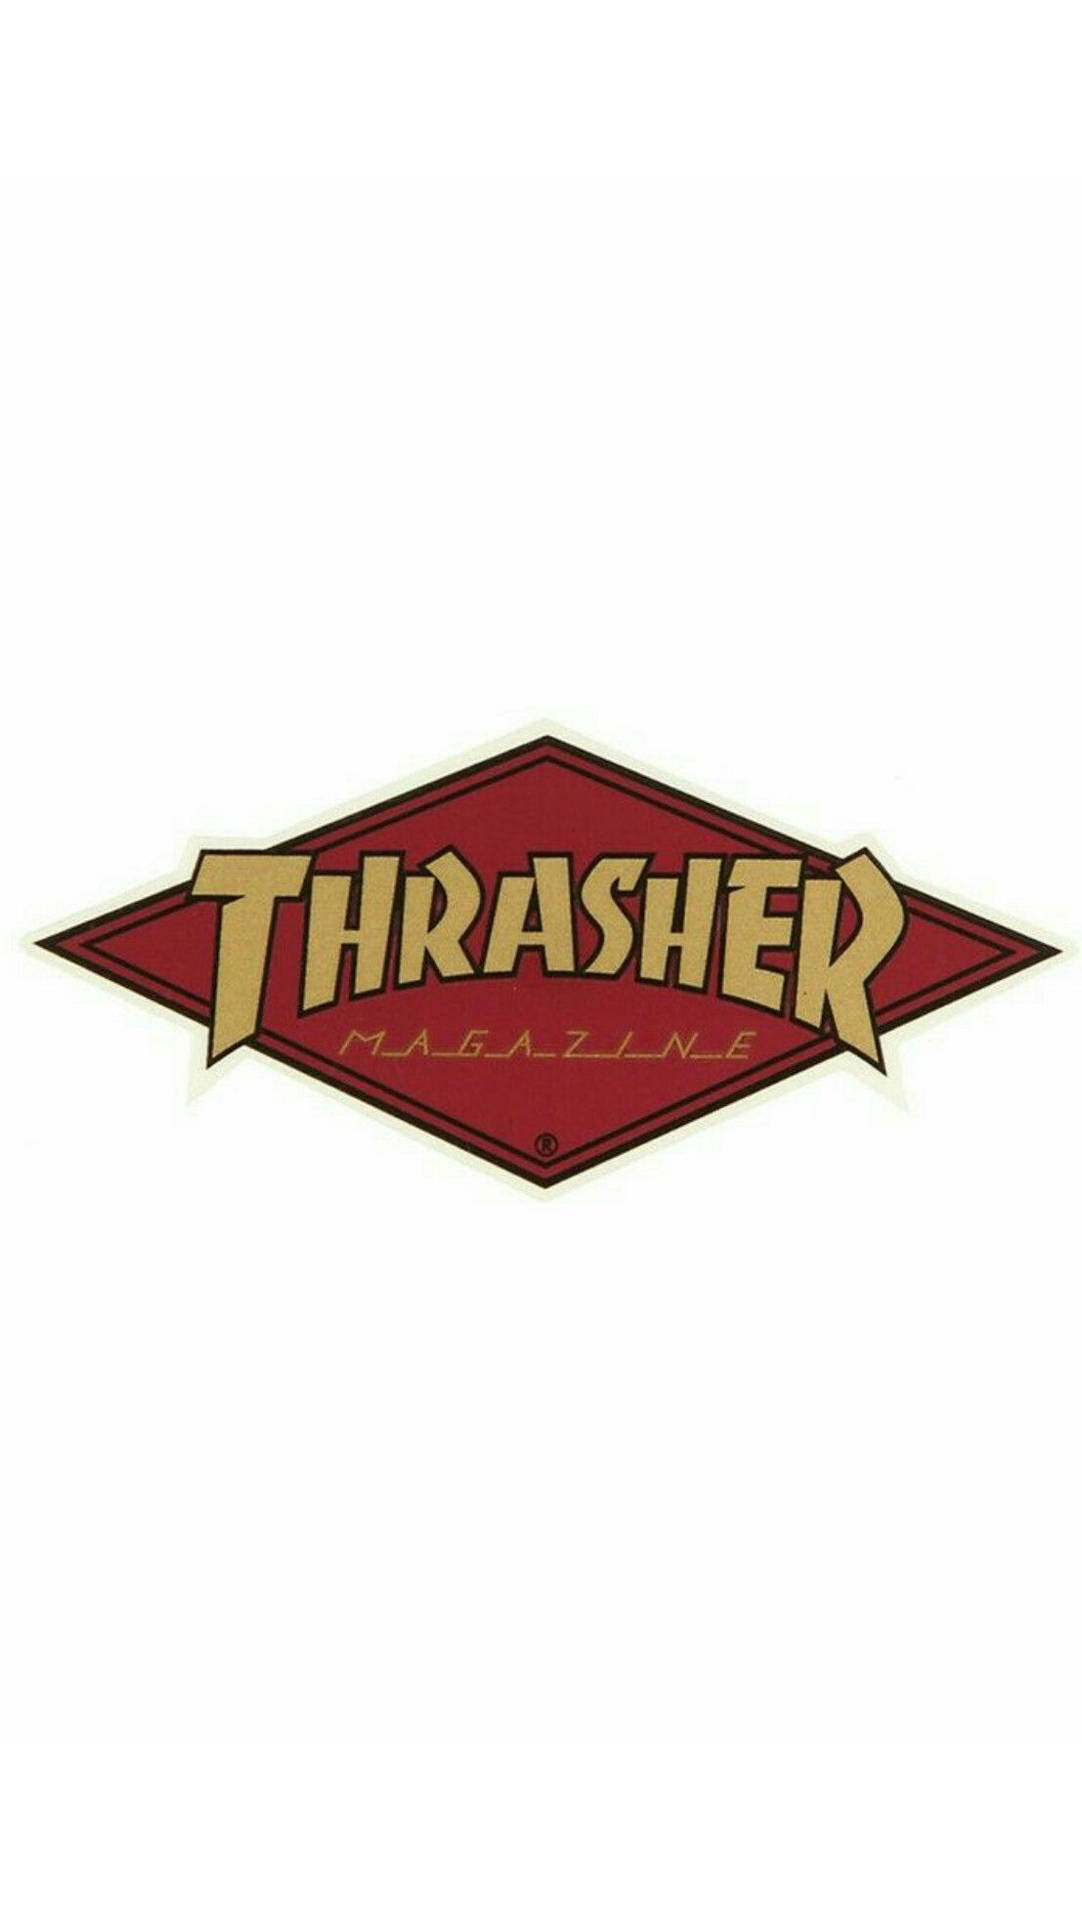 Thrasher 1107X1965 Wallpaper and Background Image